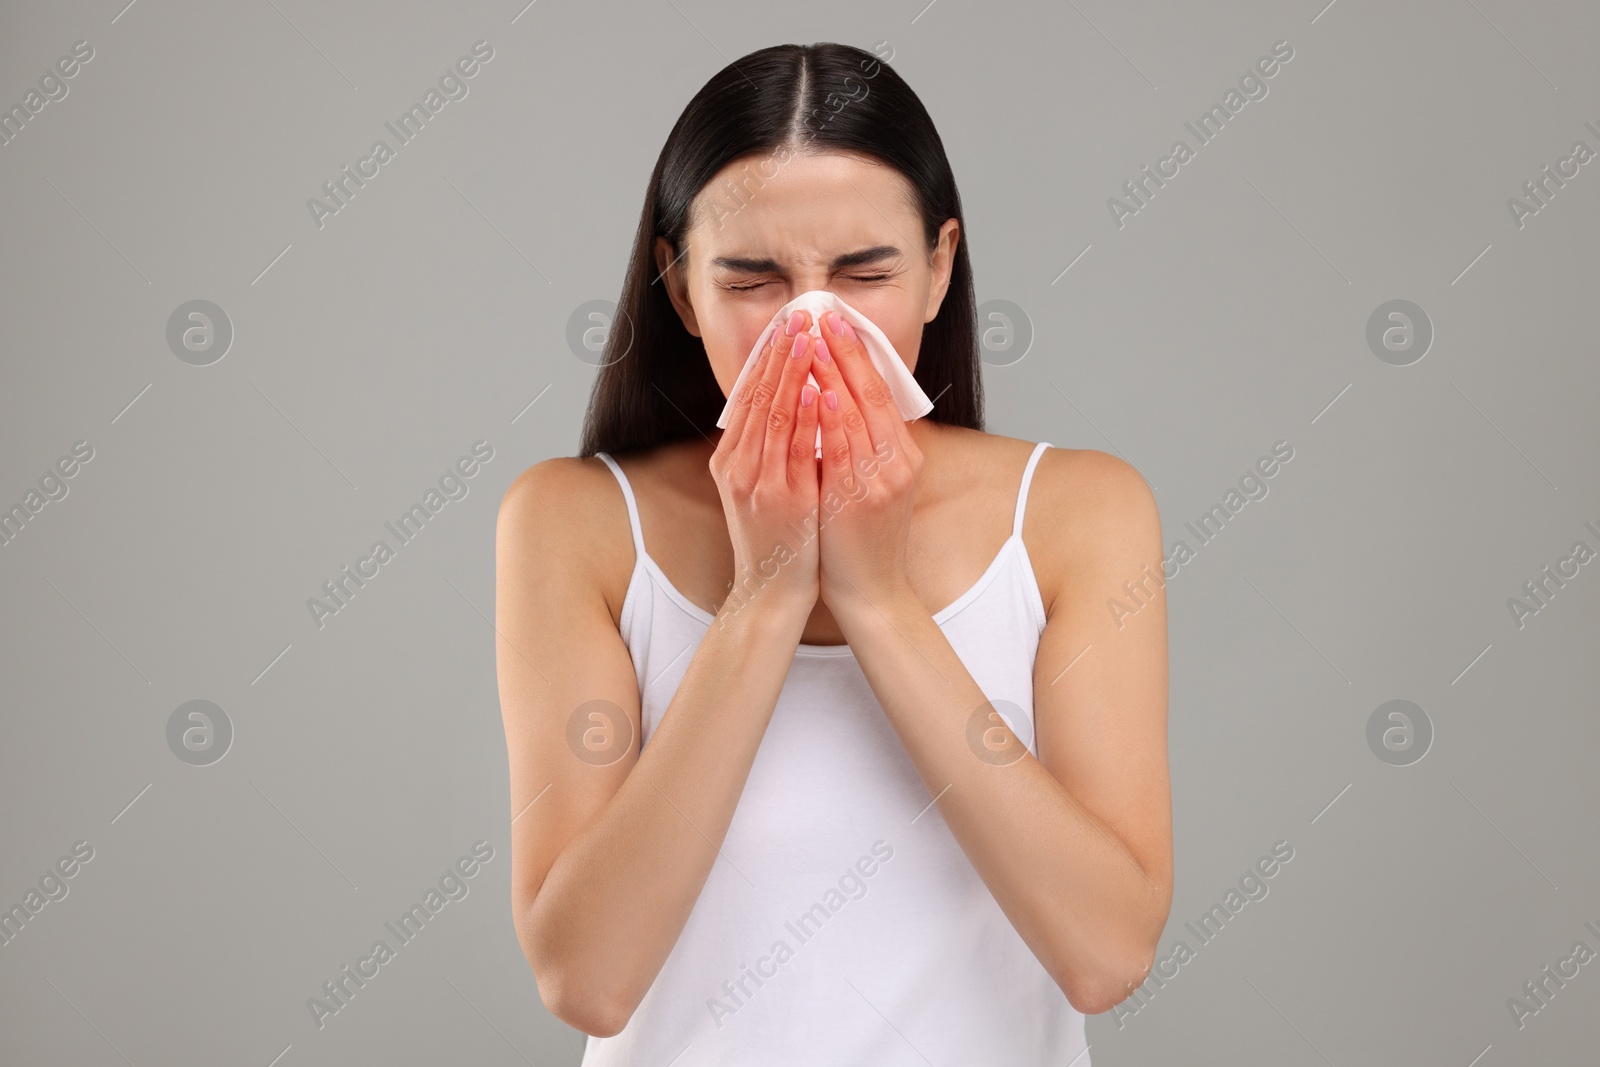 Photo of Suffering from allergy. Young woman blowing her nose in tissue on light grey background